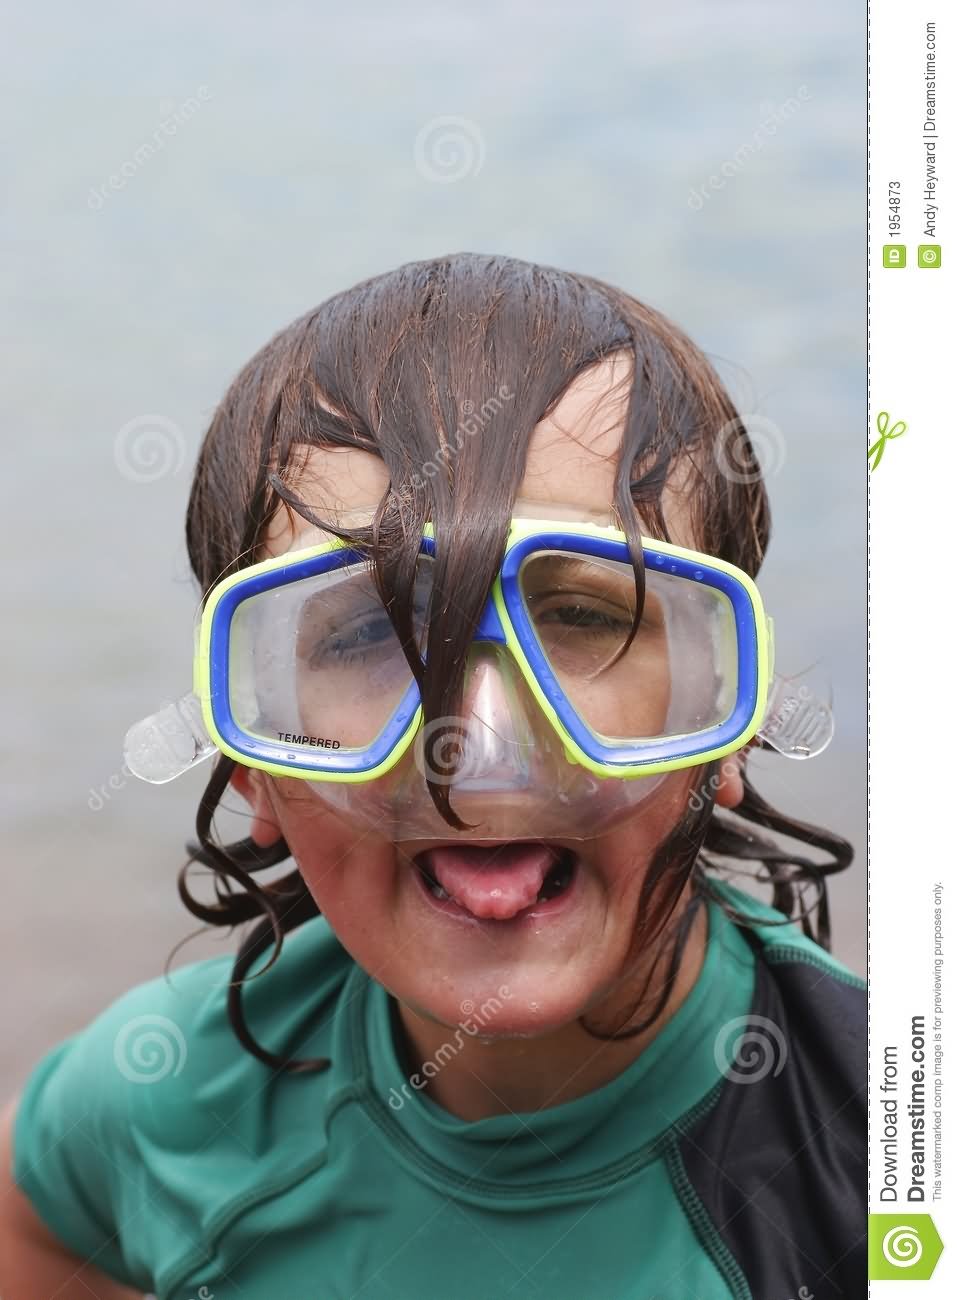 Funny Wet Boy With Diving Mask